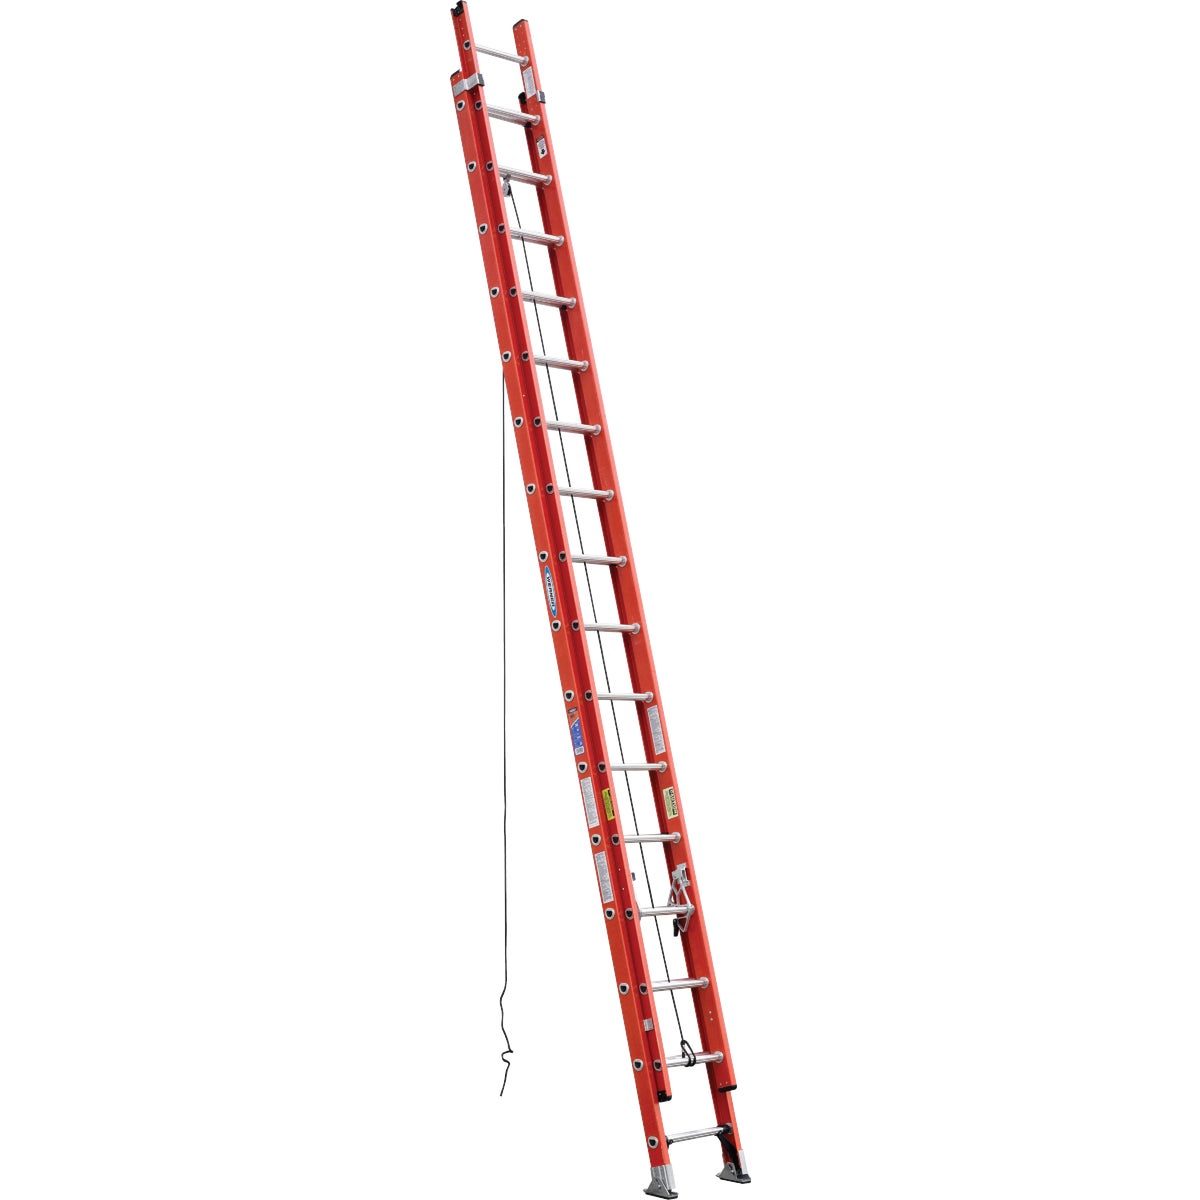 Werner 32 Ft. Fiberglass Extension Ladder with 300 Lb. Load Capacity Type IA Duty Rating